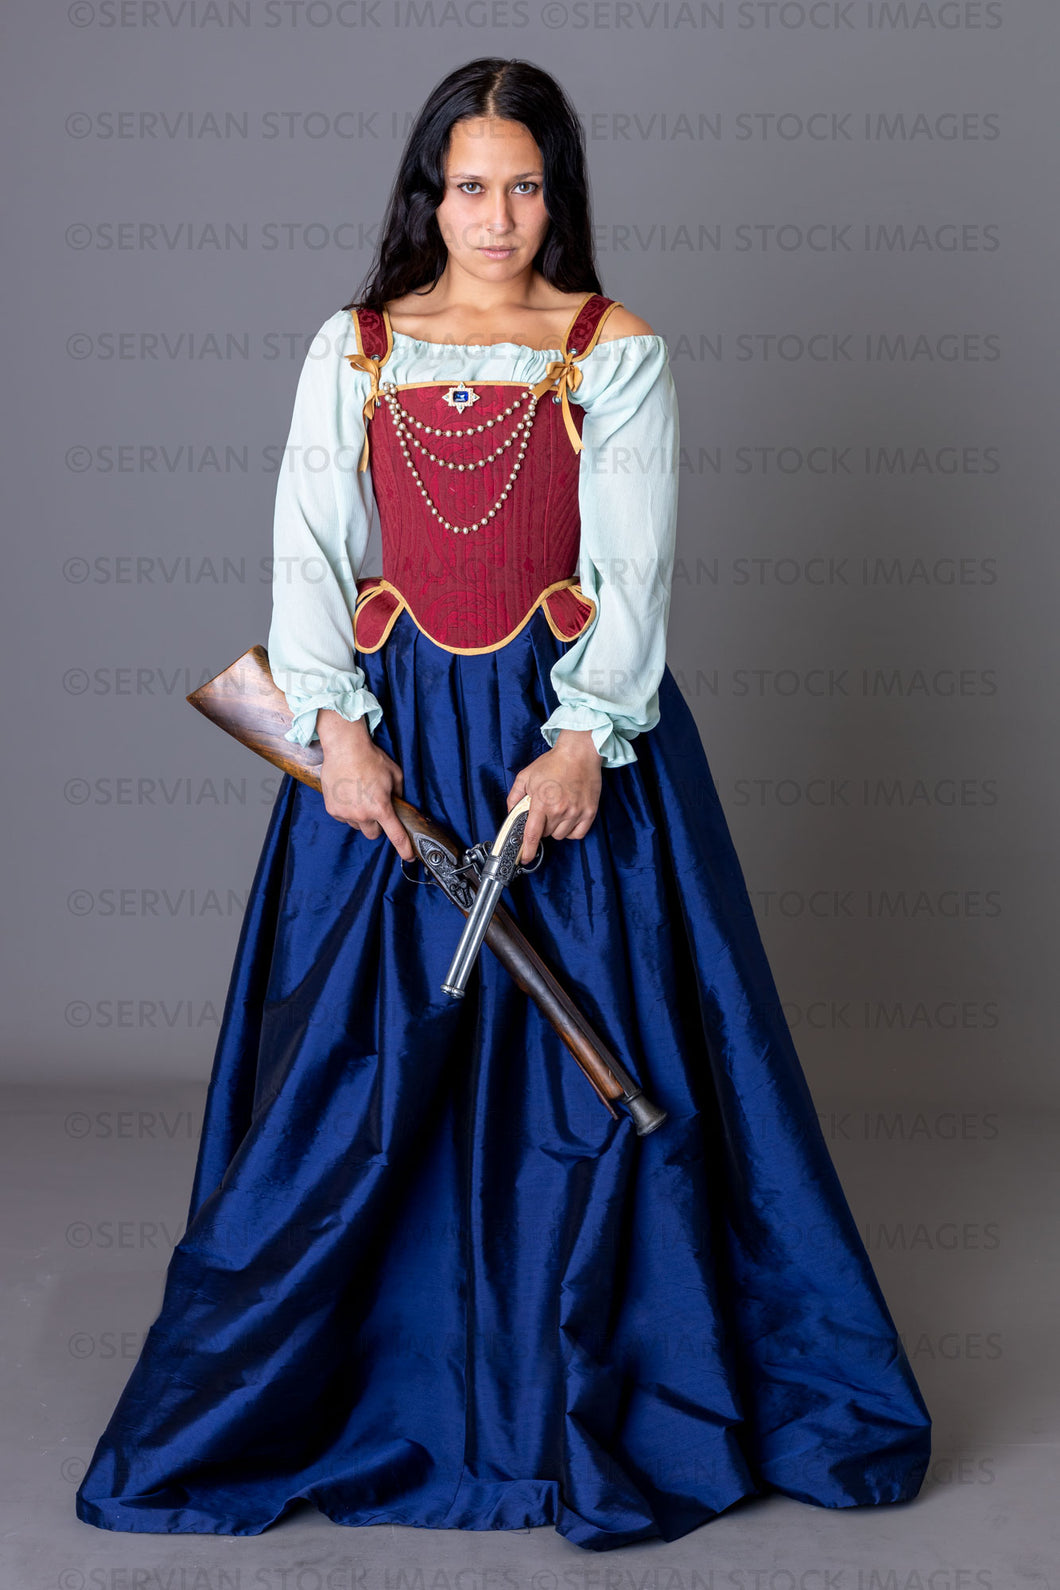 Pirate woman holding weapons against a grey backdrop (Sylvia 6033)